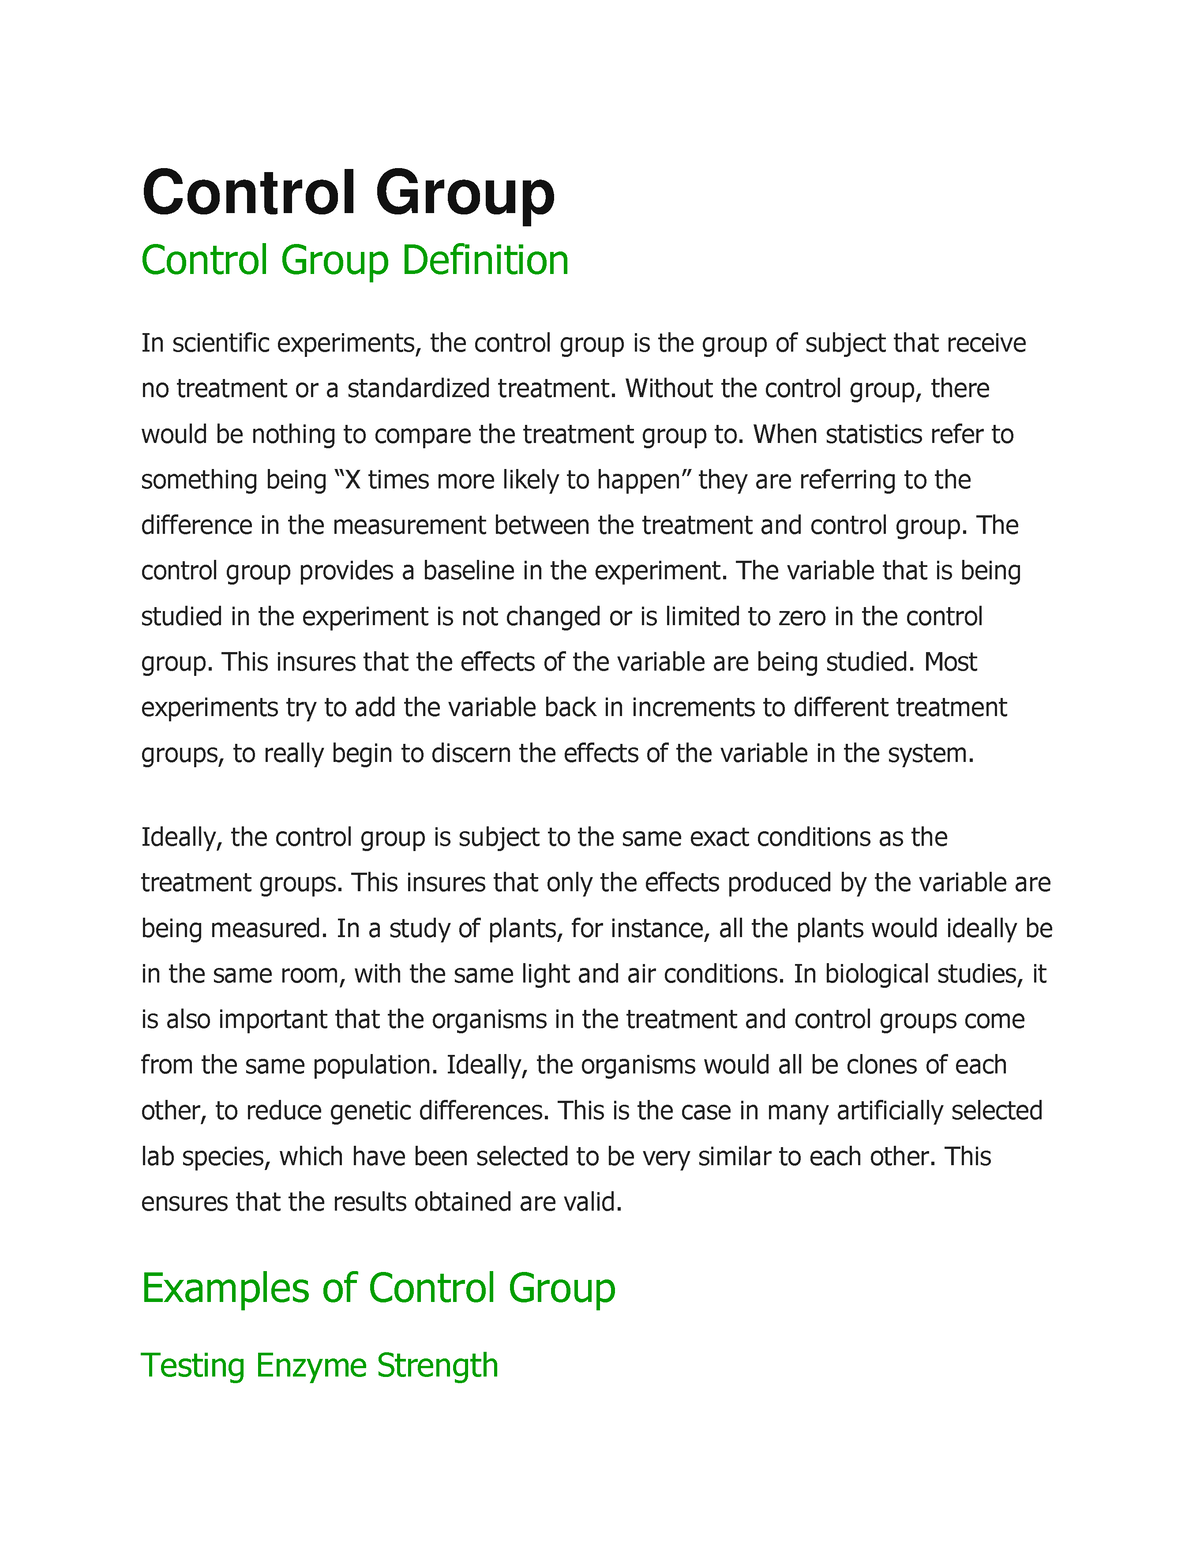 Control Group Definition and Examples